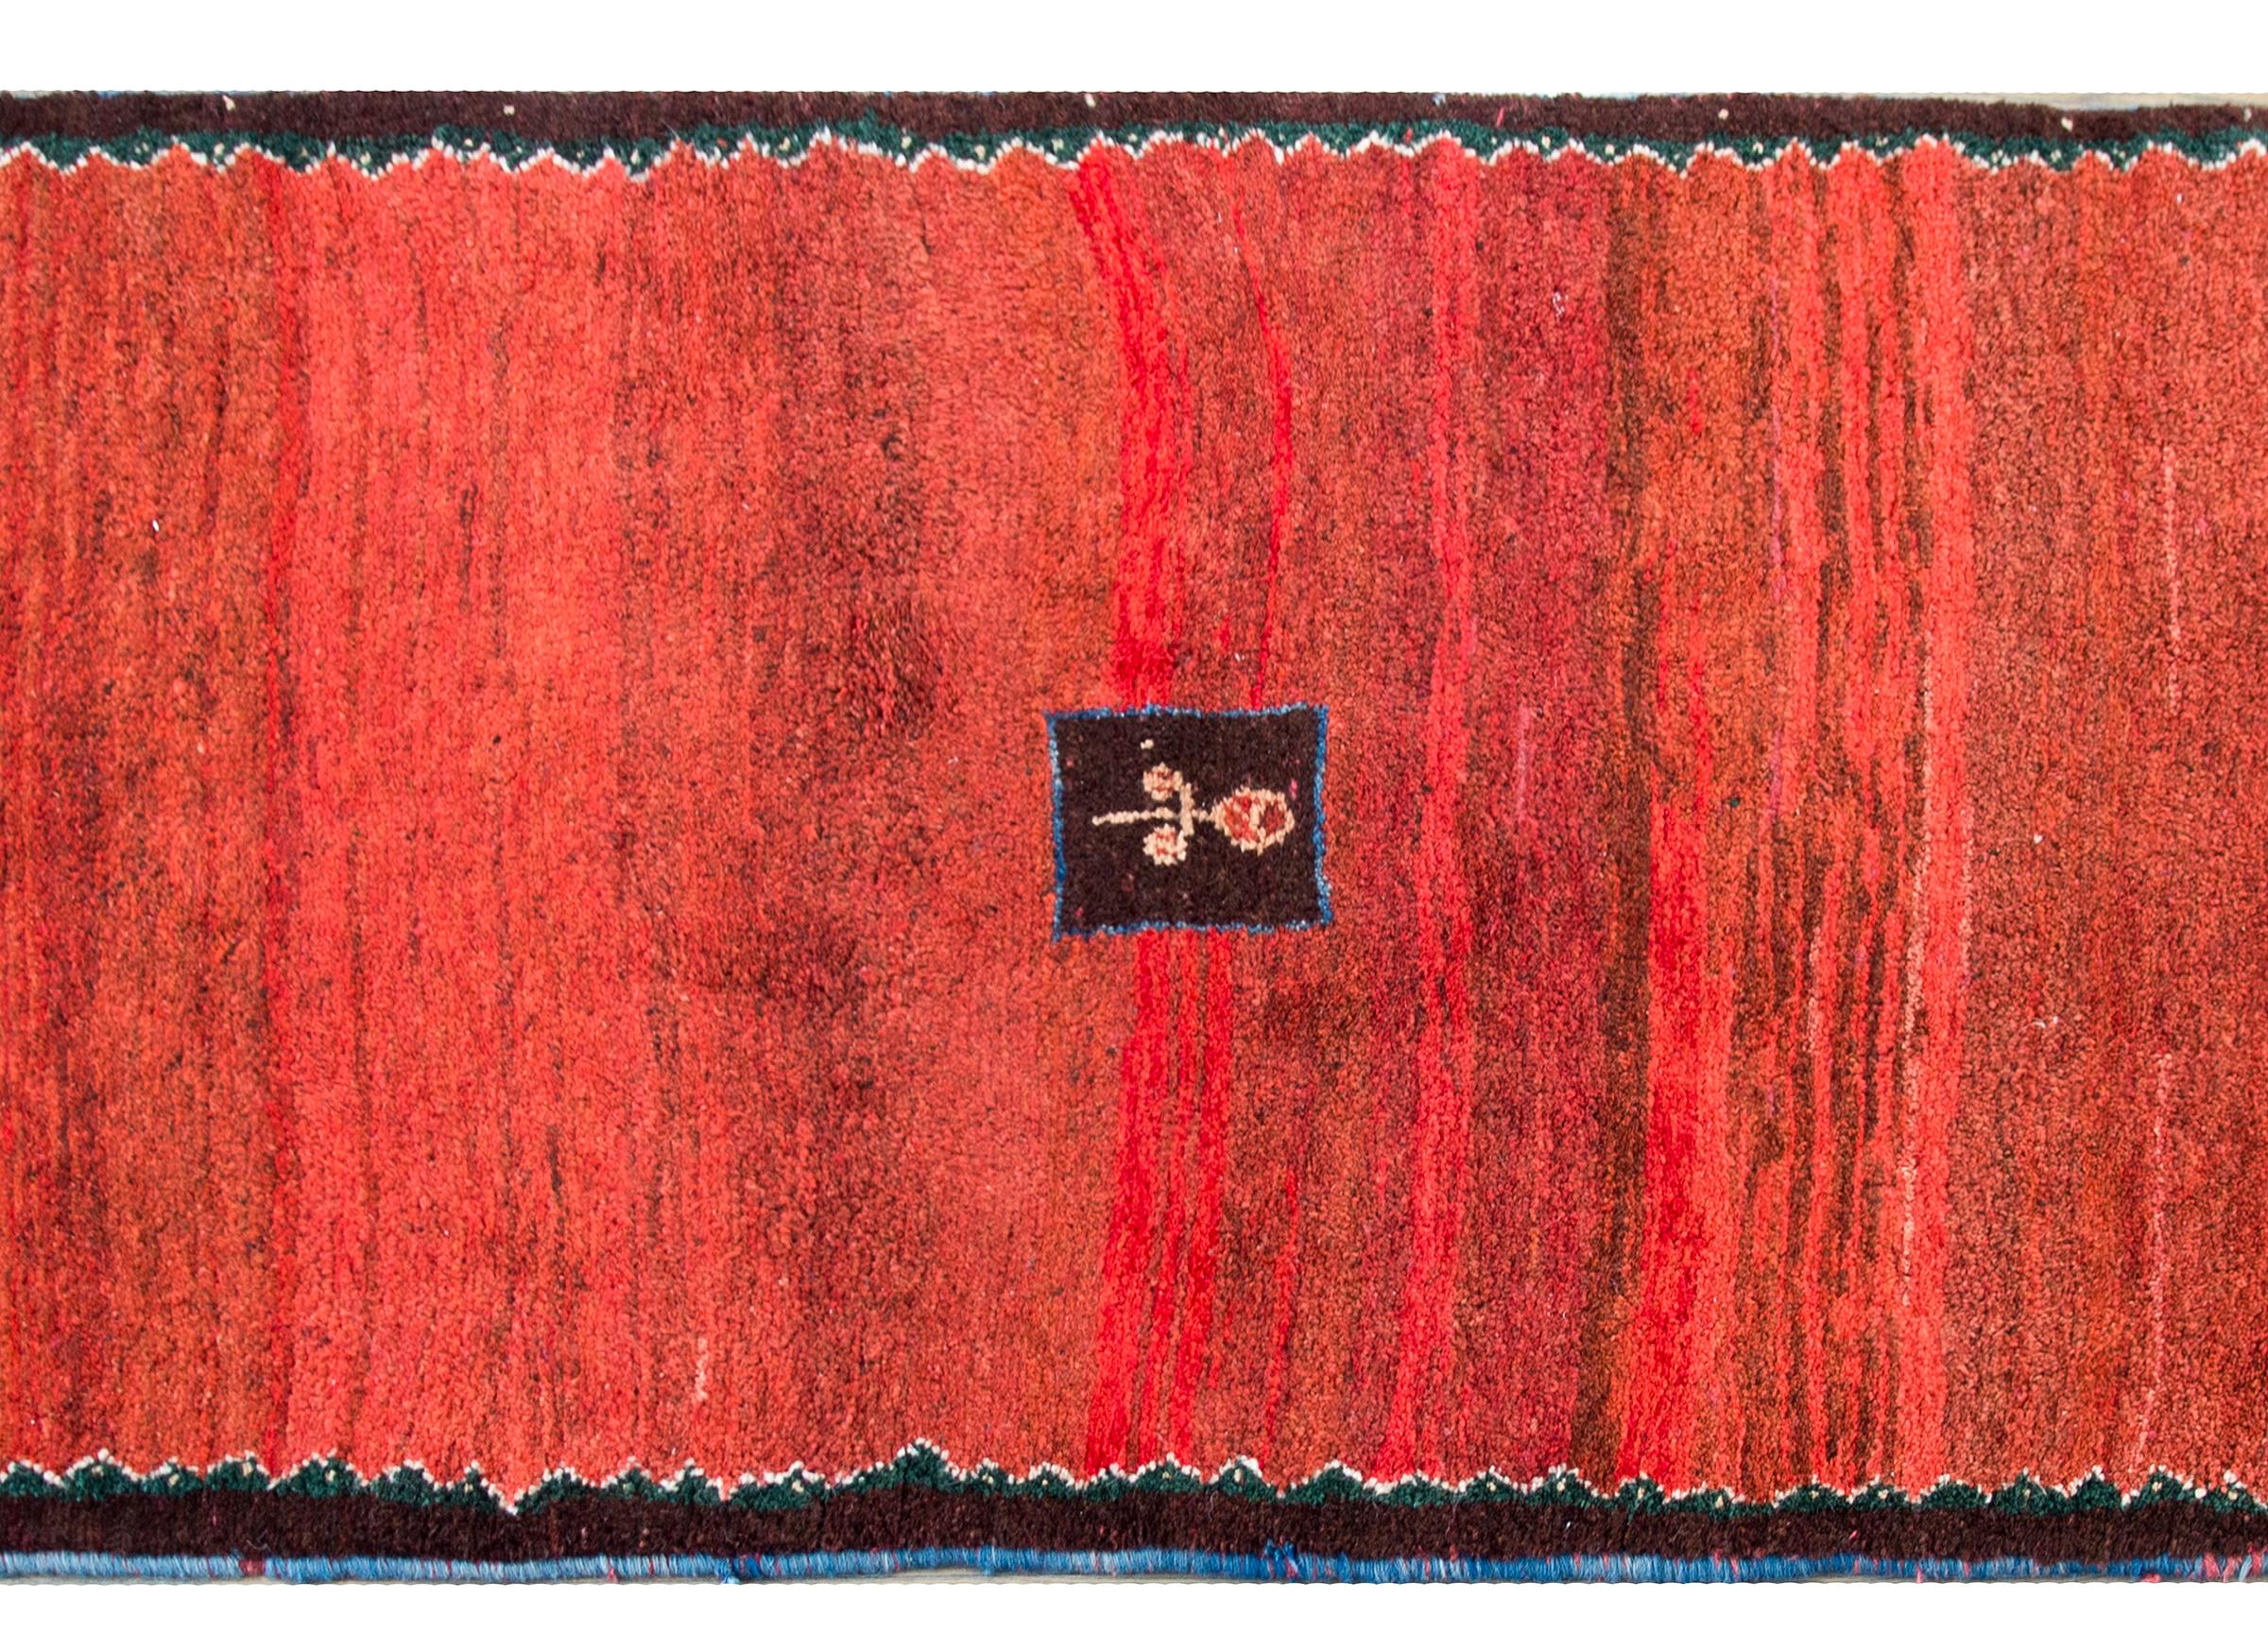 A wonderful mid-20th century Persian Gabbeh rug with a fantastic abrash crimson field with a small central floral medallion and another flower in each corner. The border is simple with a thin zigzag pattern woven in indigo, gold, and black.